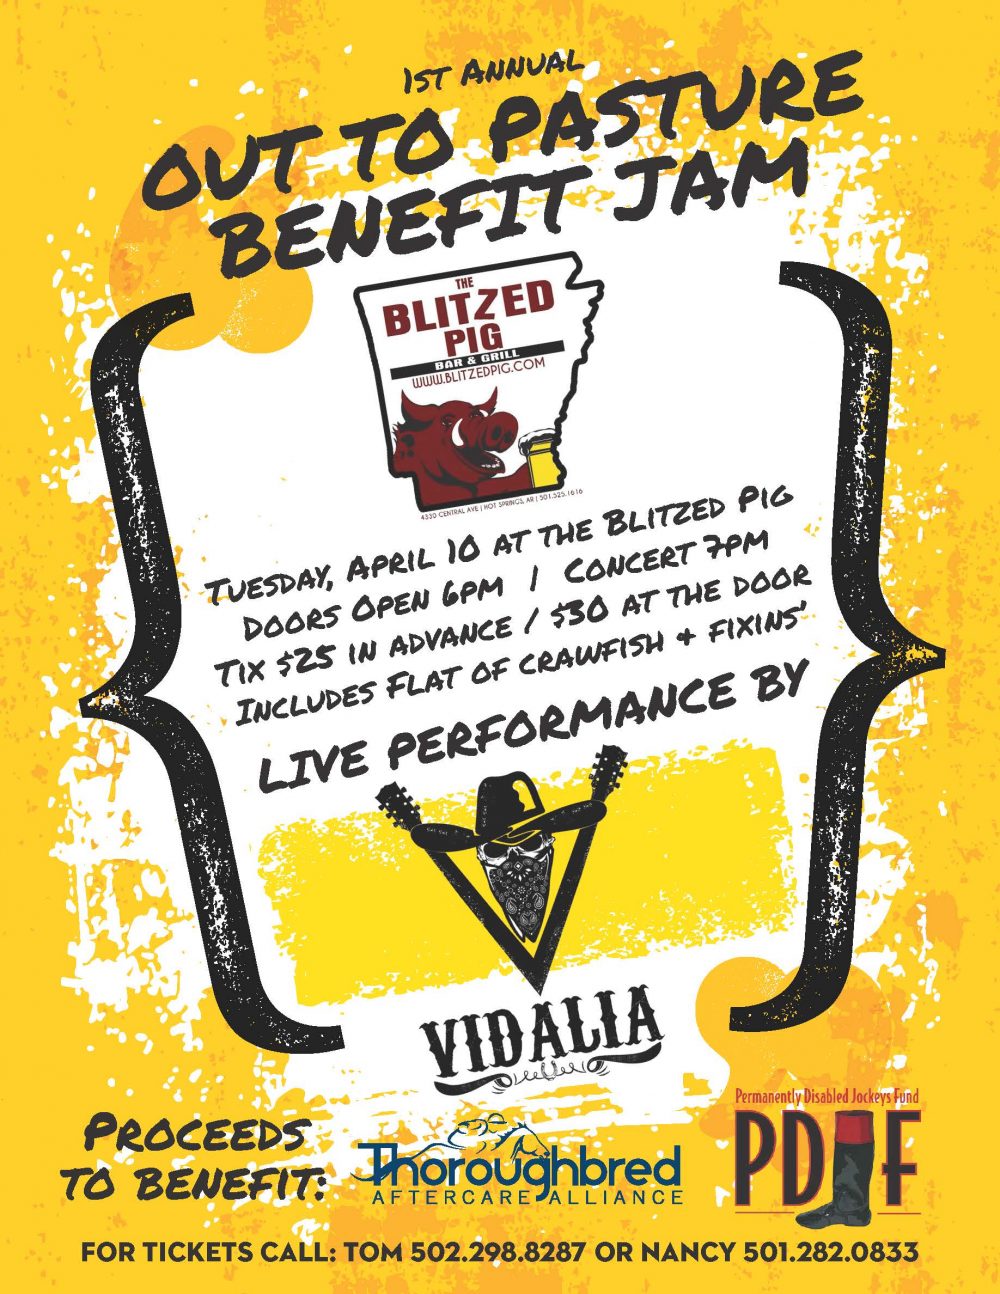 Out to Pasture Benefit Jam flyer